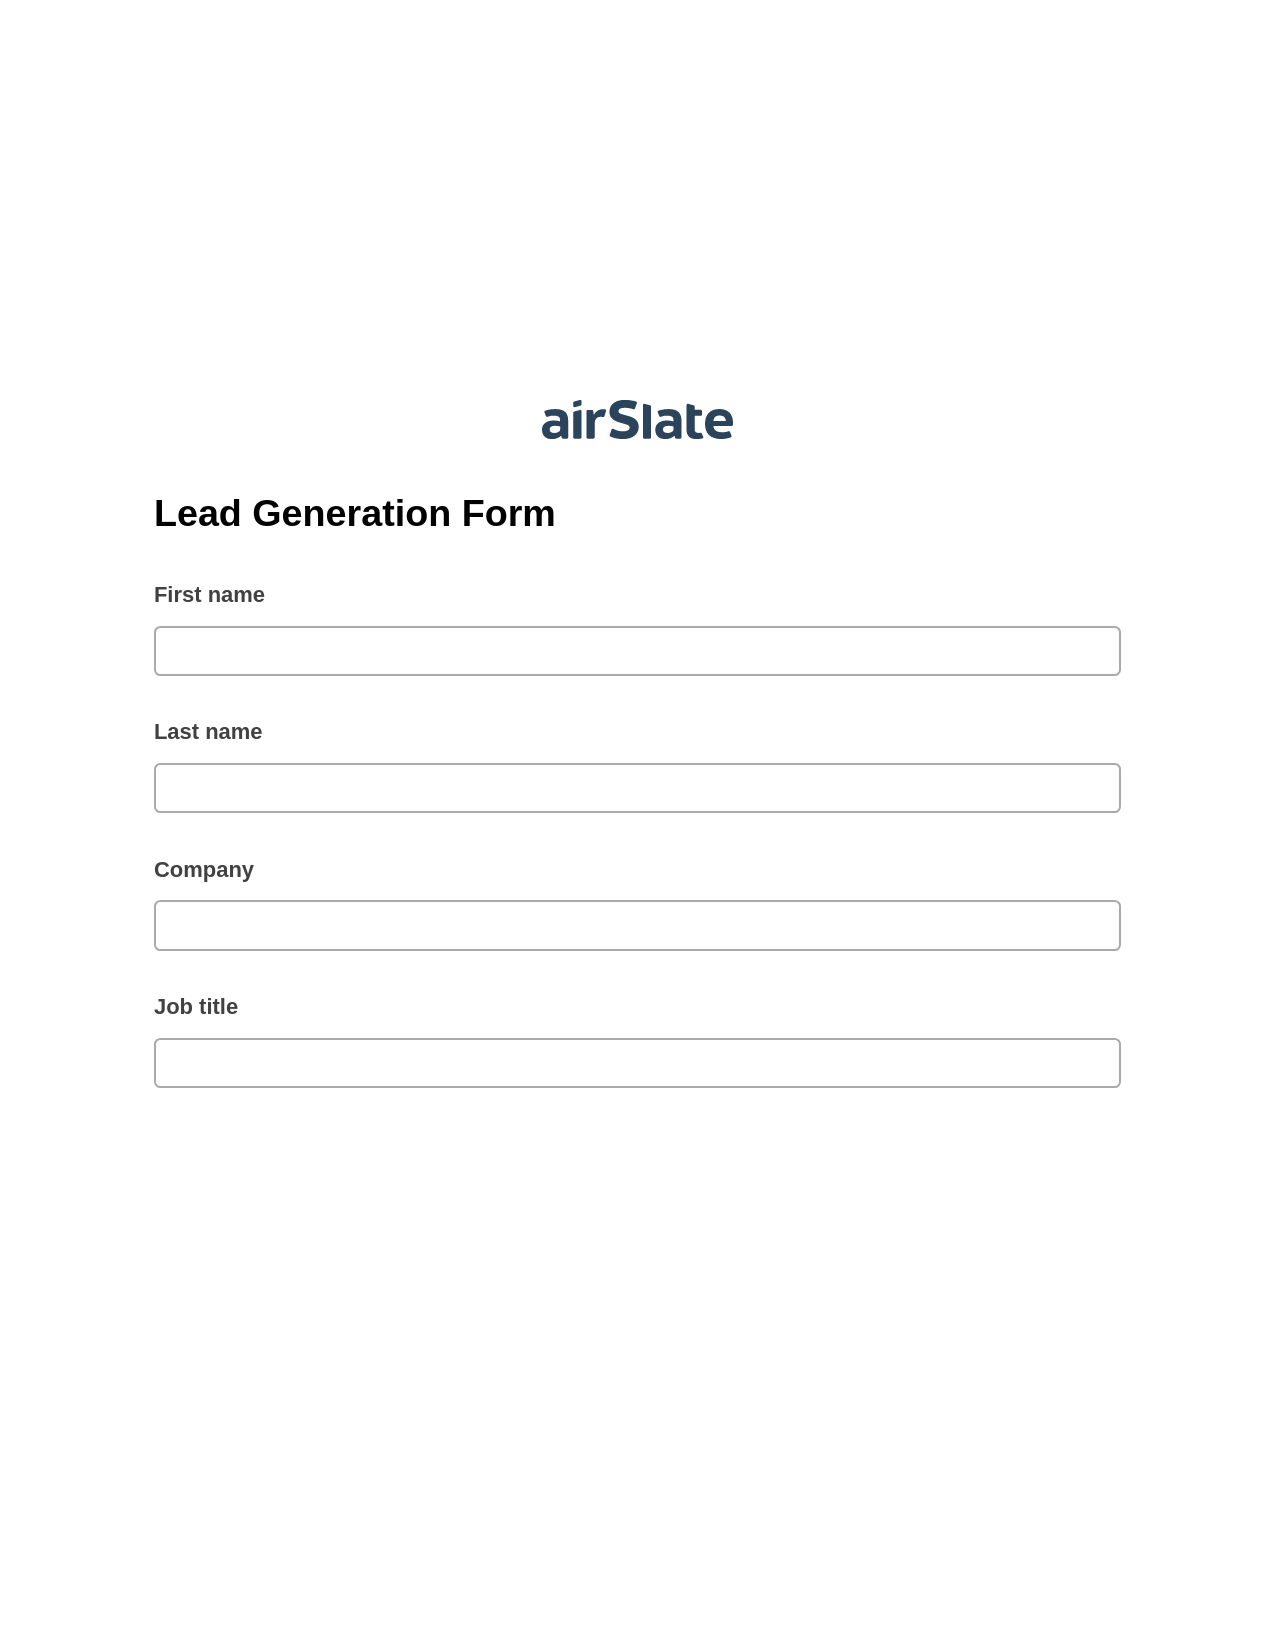 Lead Generation Form Pre-fill from another Slate Bot, Revoke Access Bot, Post-finish Document Bot